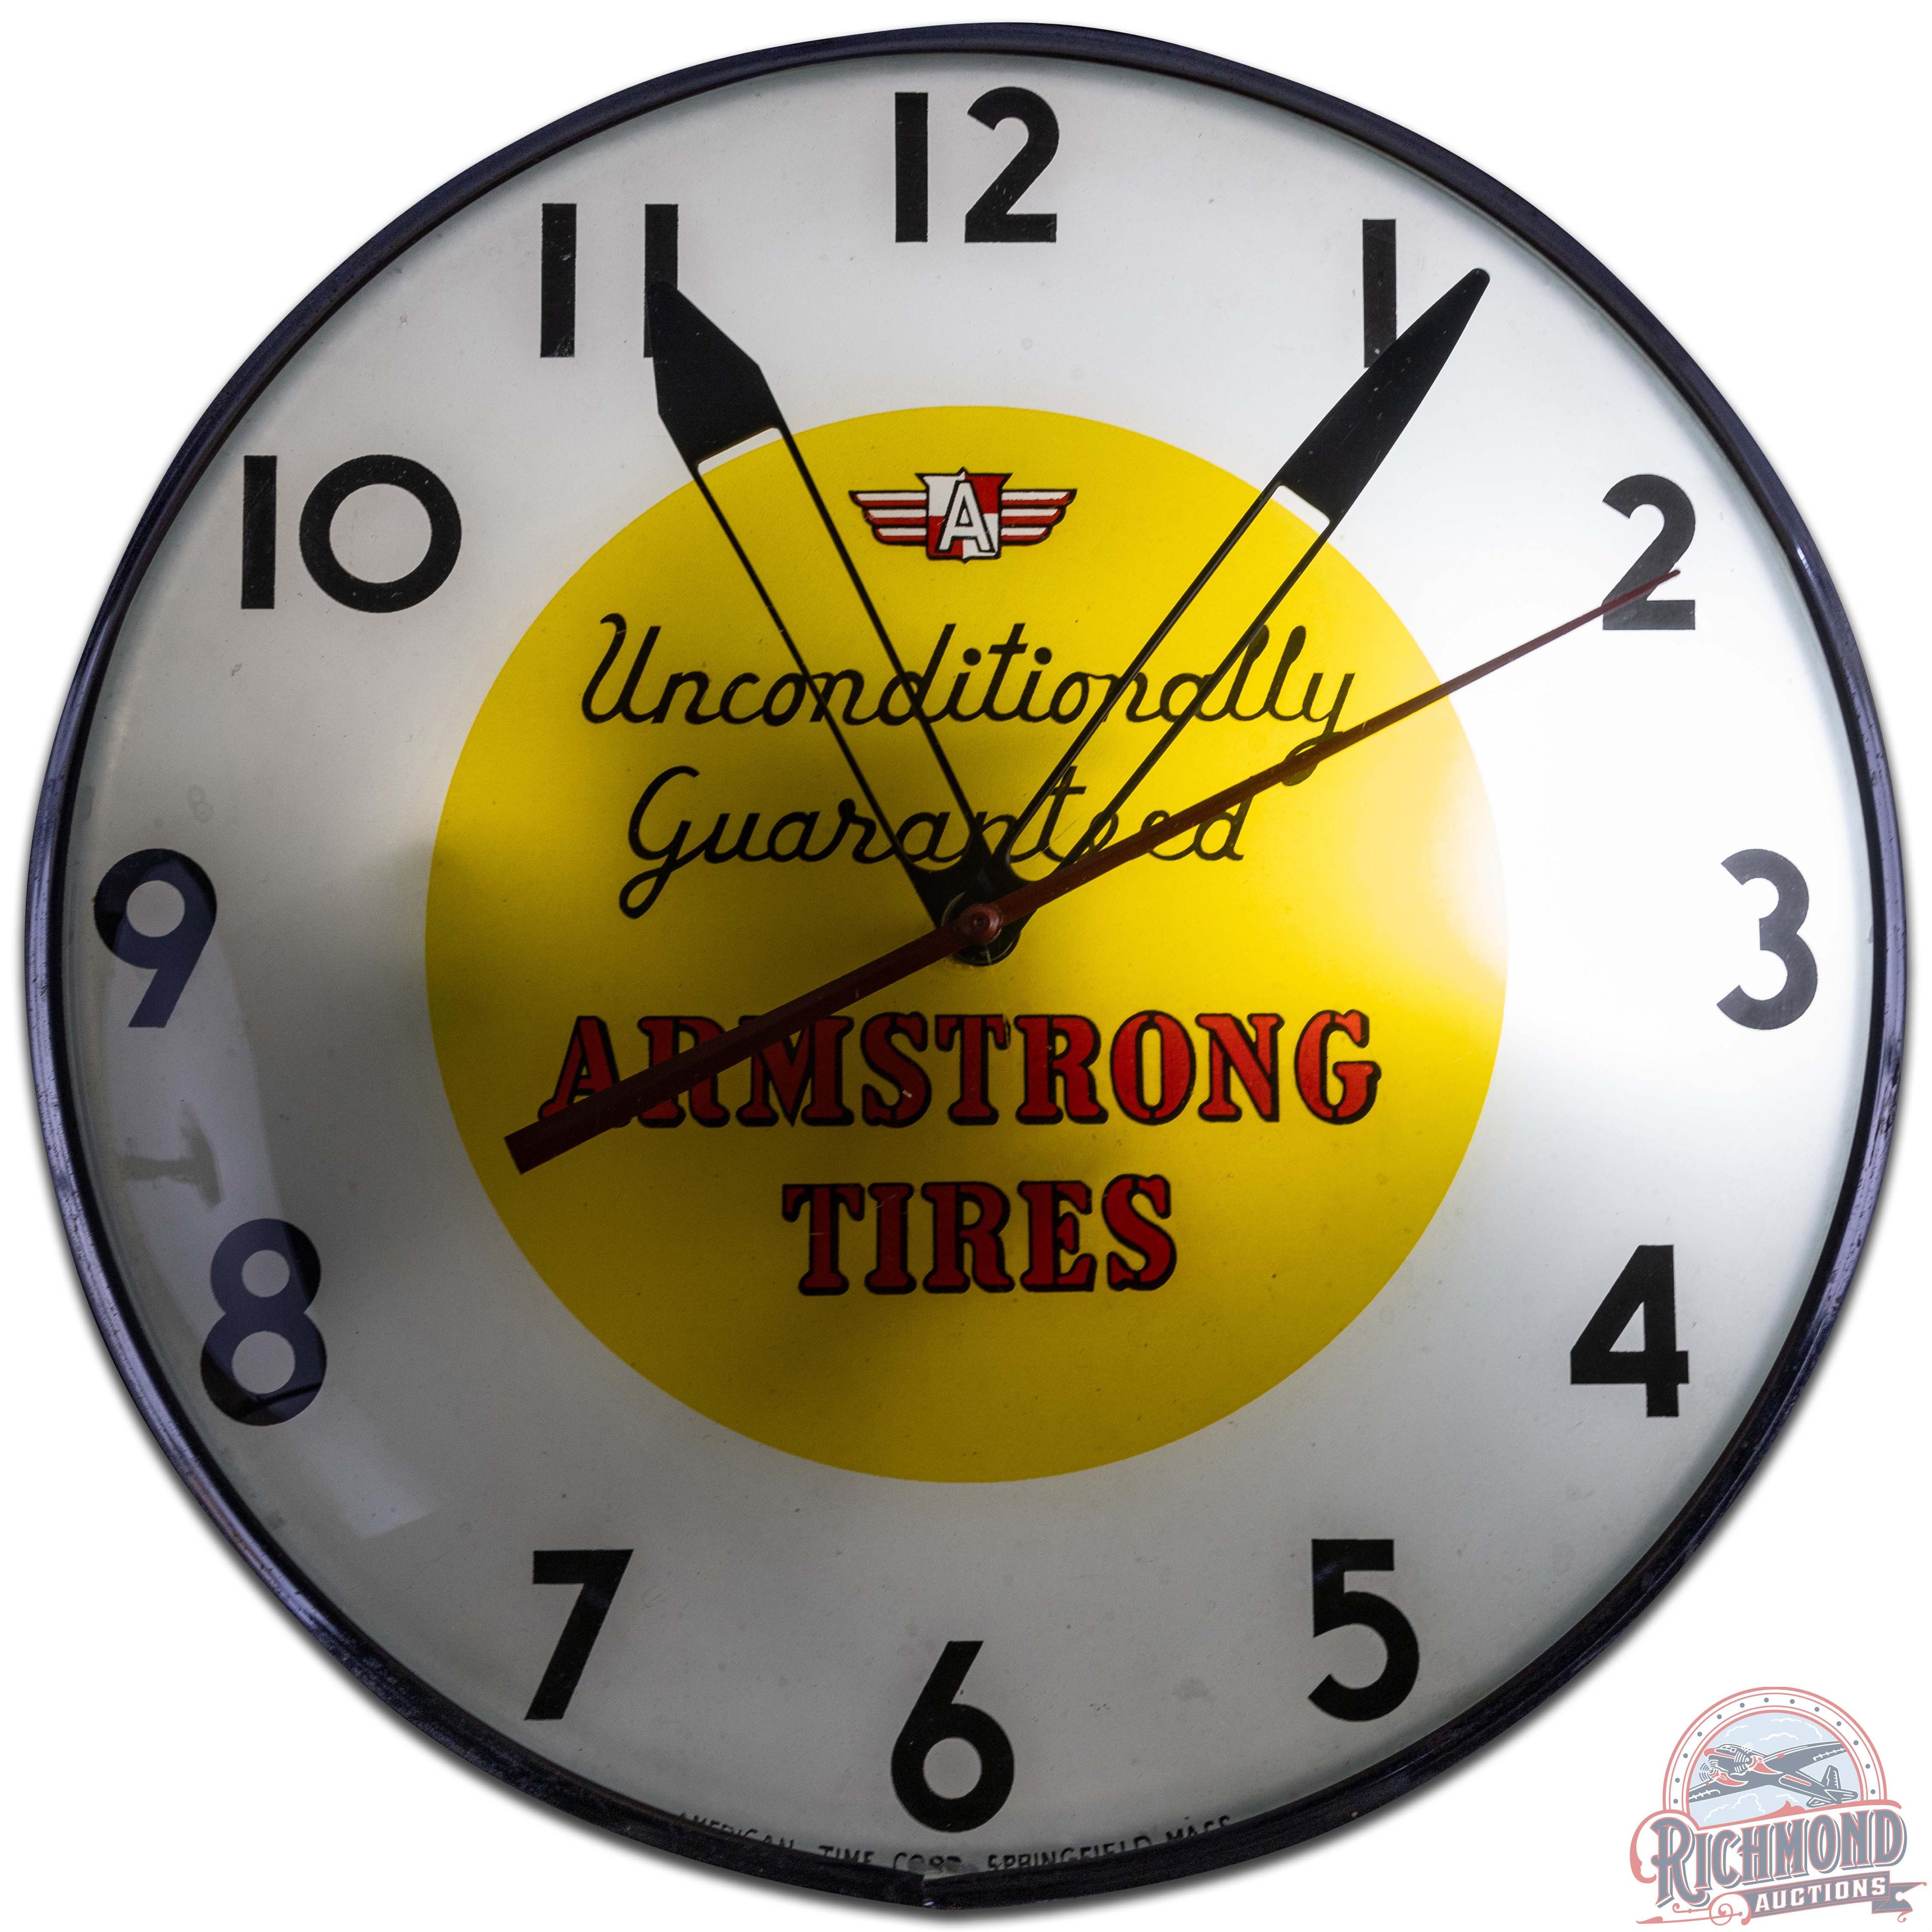 Armstrong Tires 15" American Time Corp. Advertising Clock w/ Logo